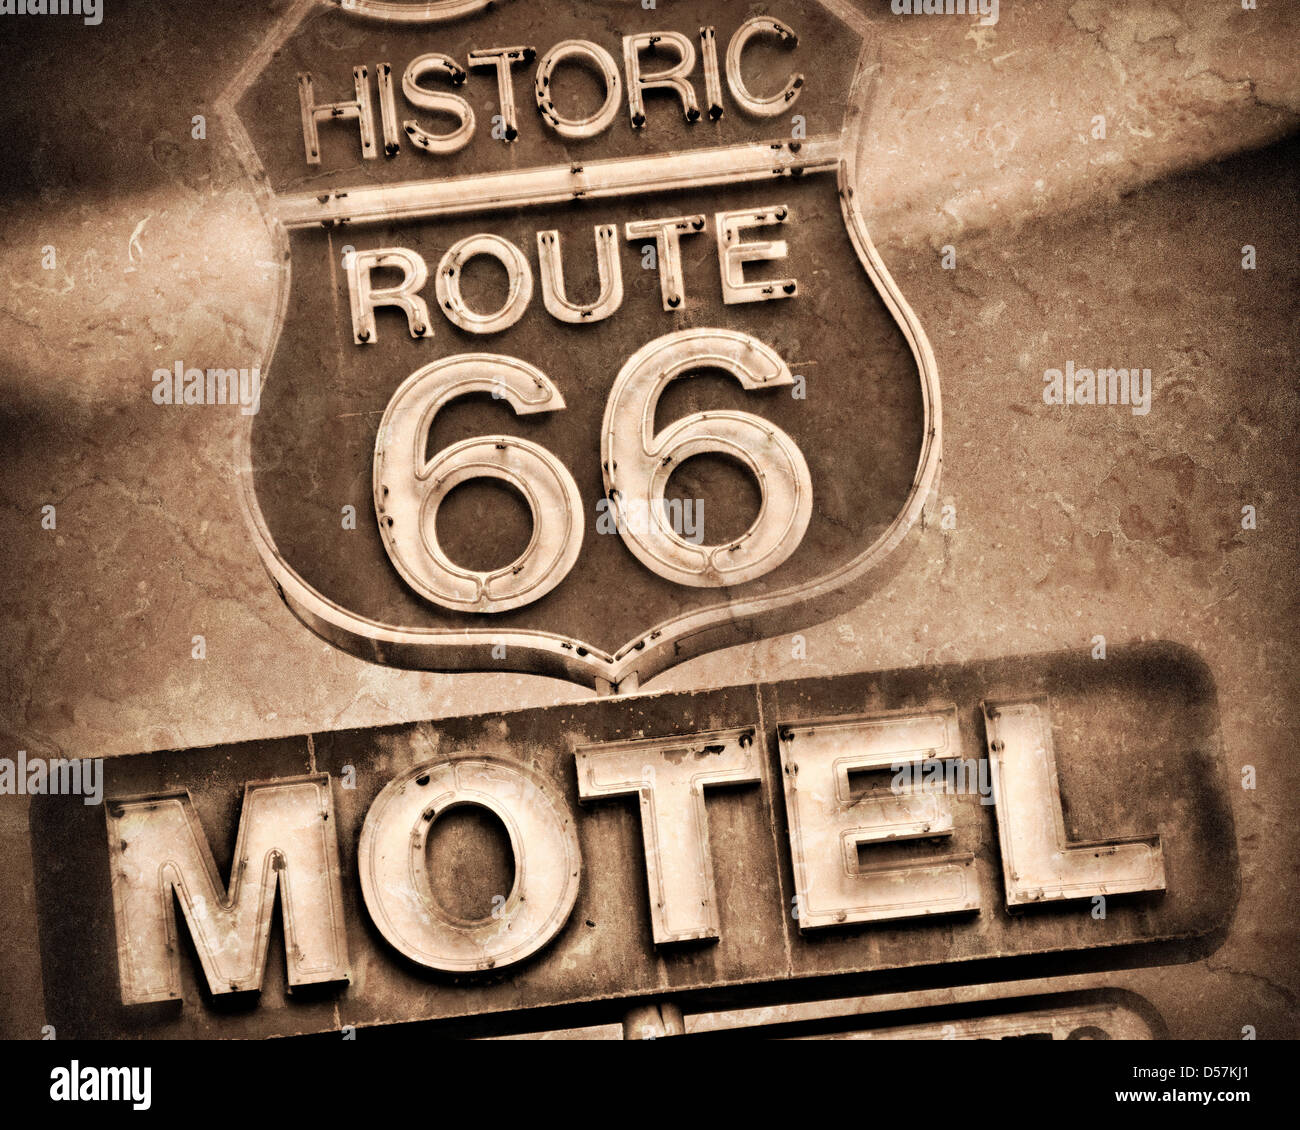 Vintage Route 66 Motel sign Stock Photo